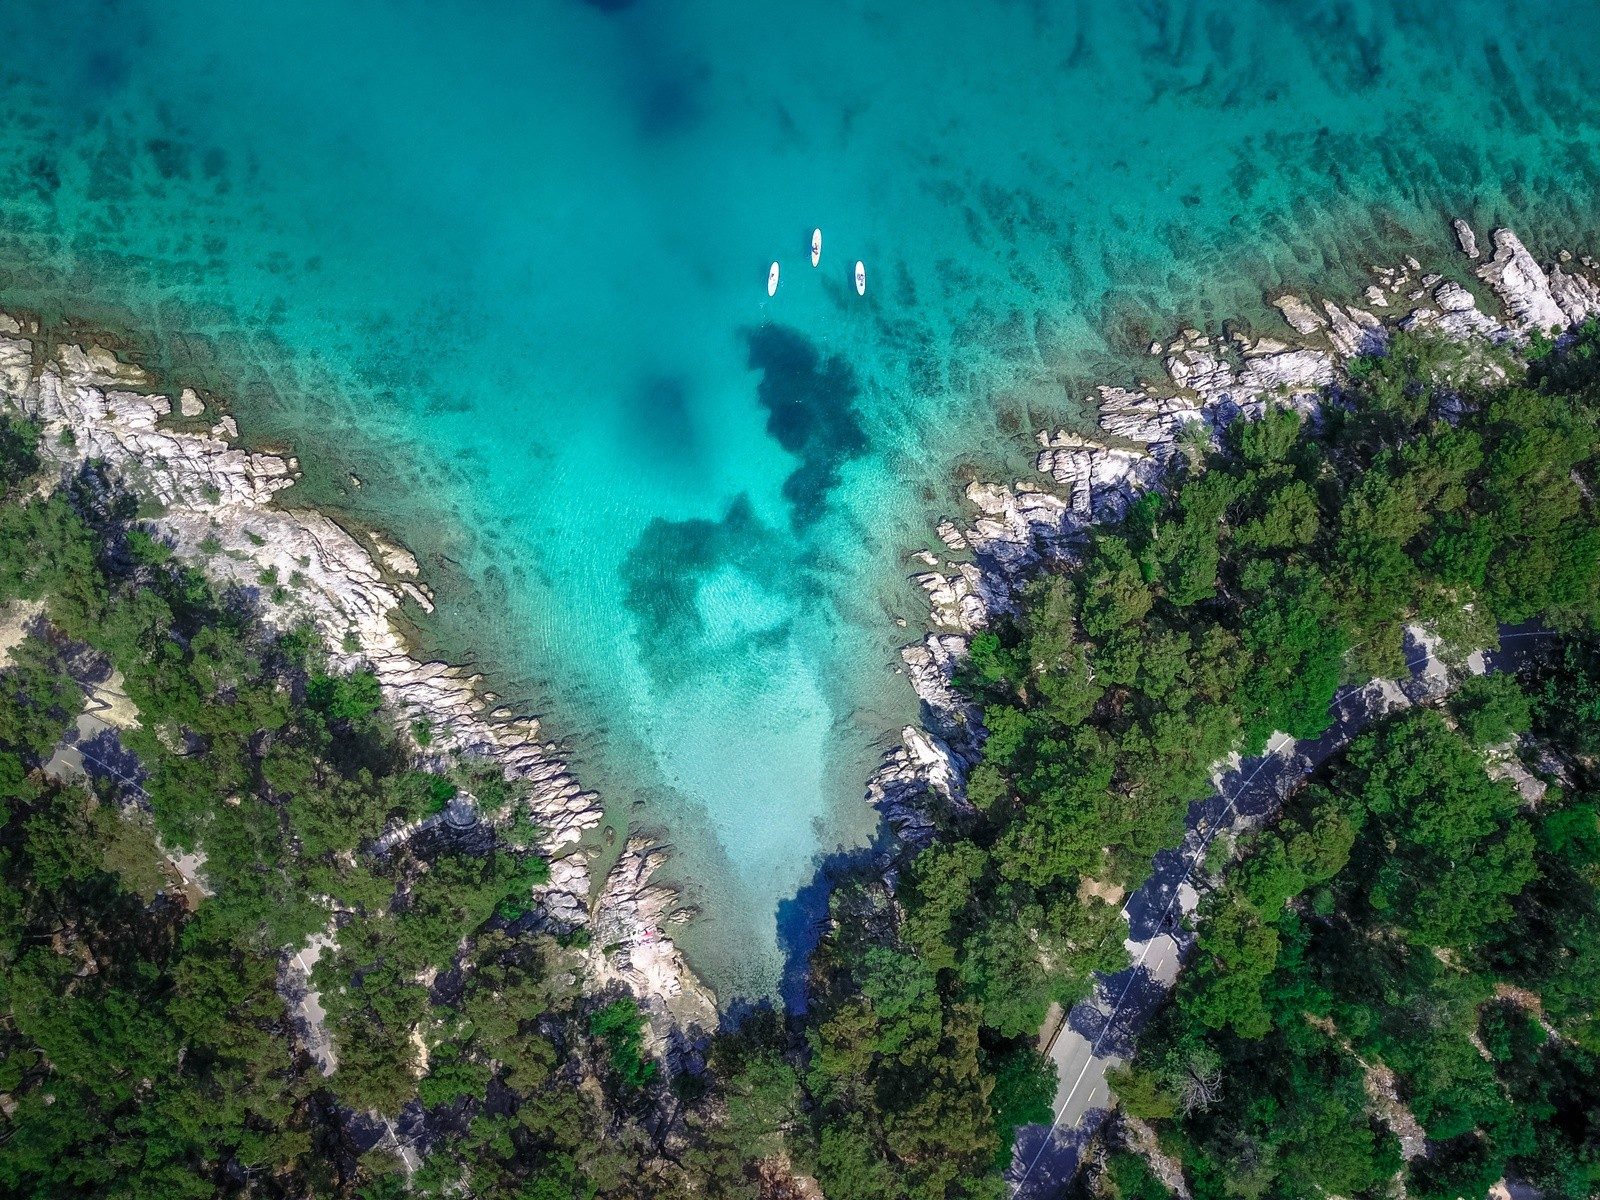 An aerial view of SUPers on the water in the Split Peninsula, Croatia.